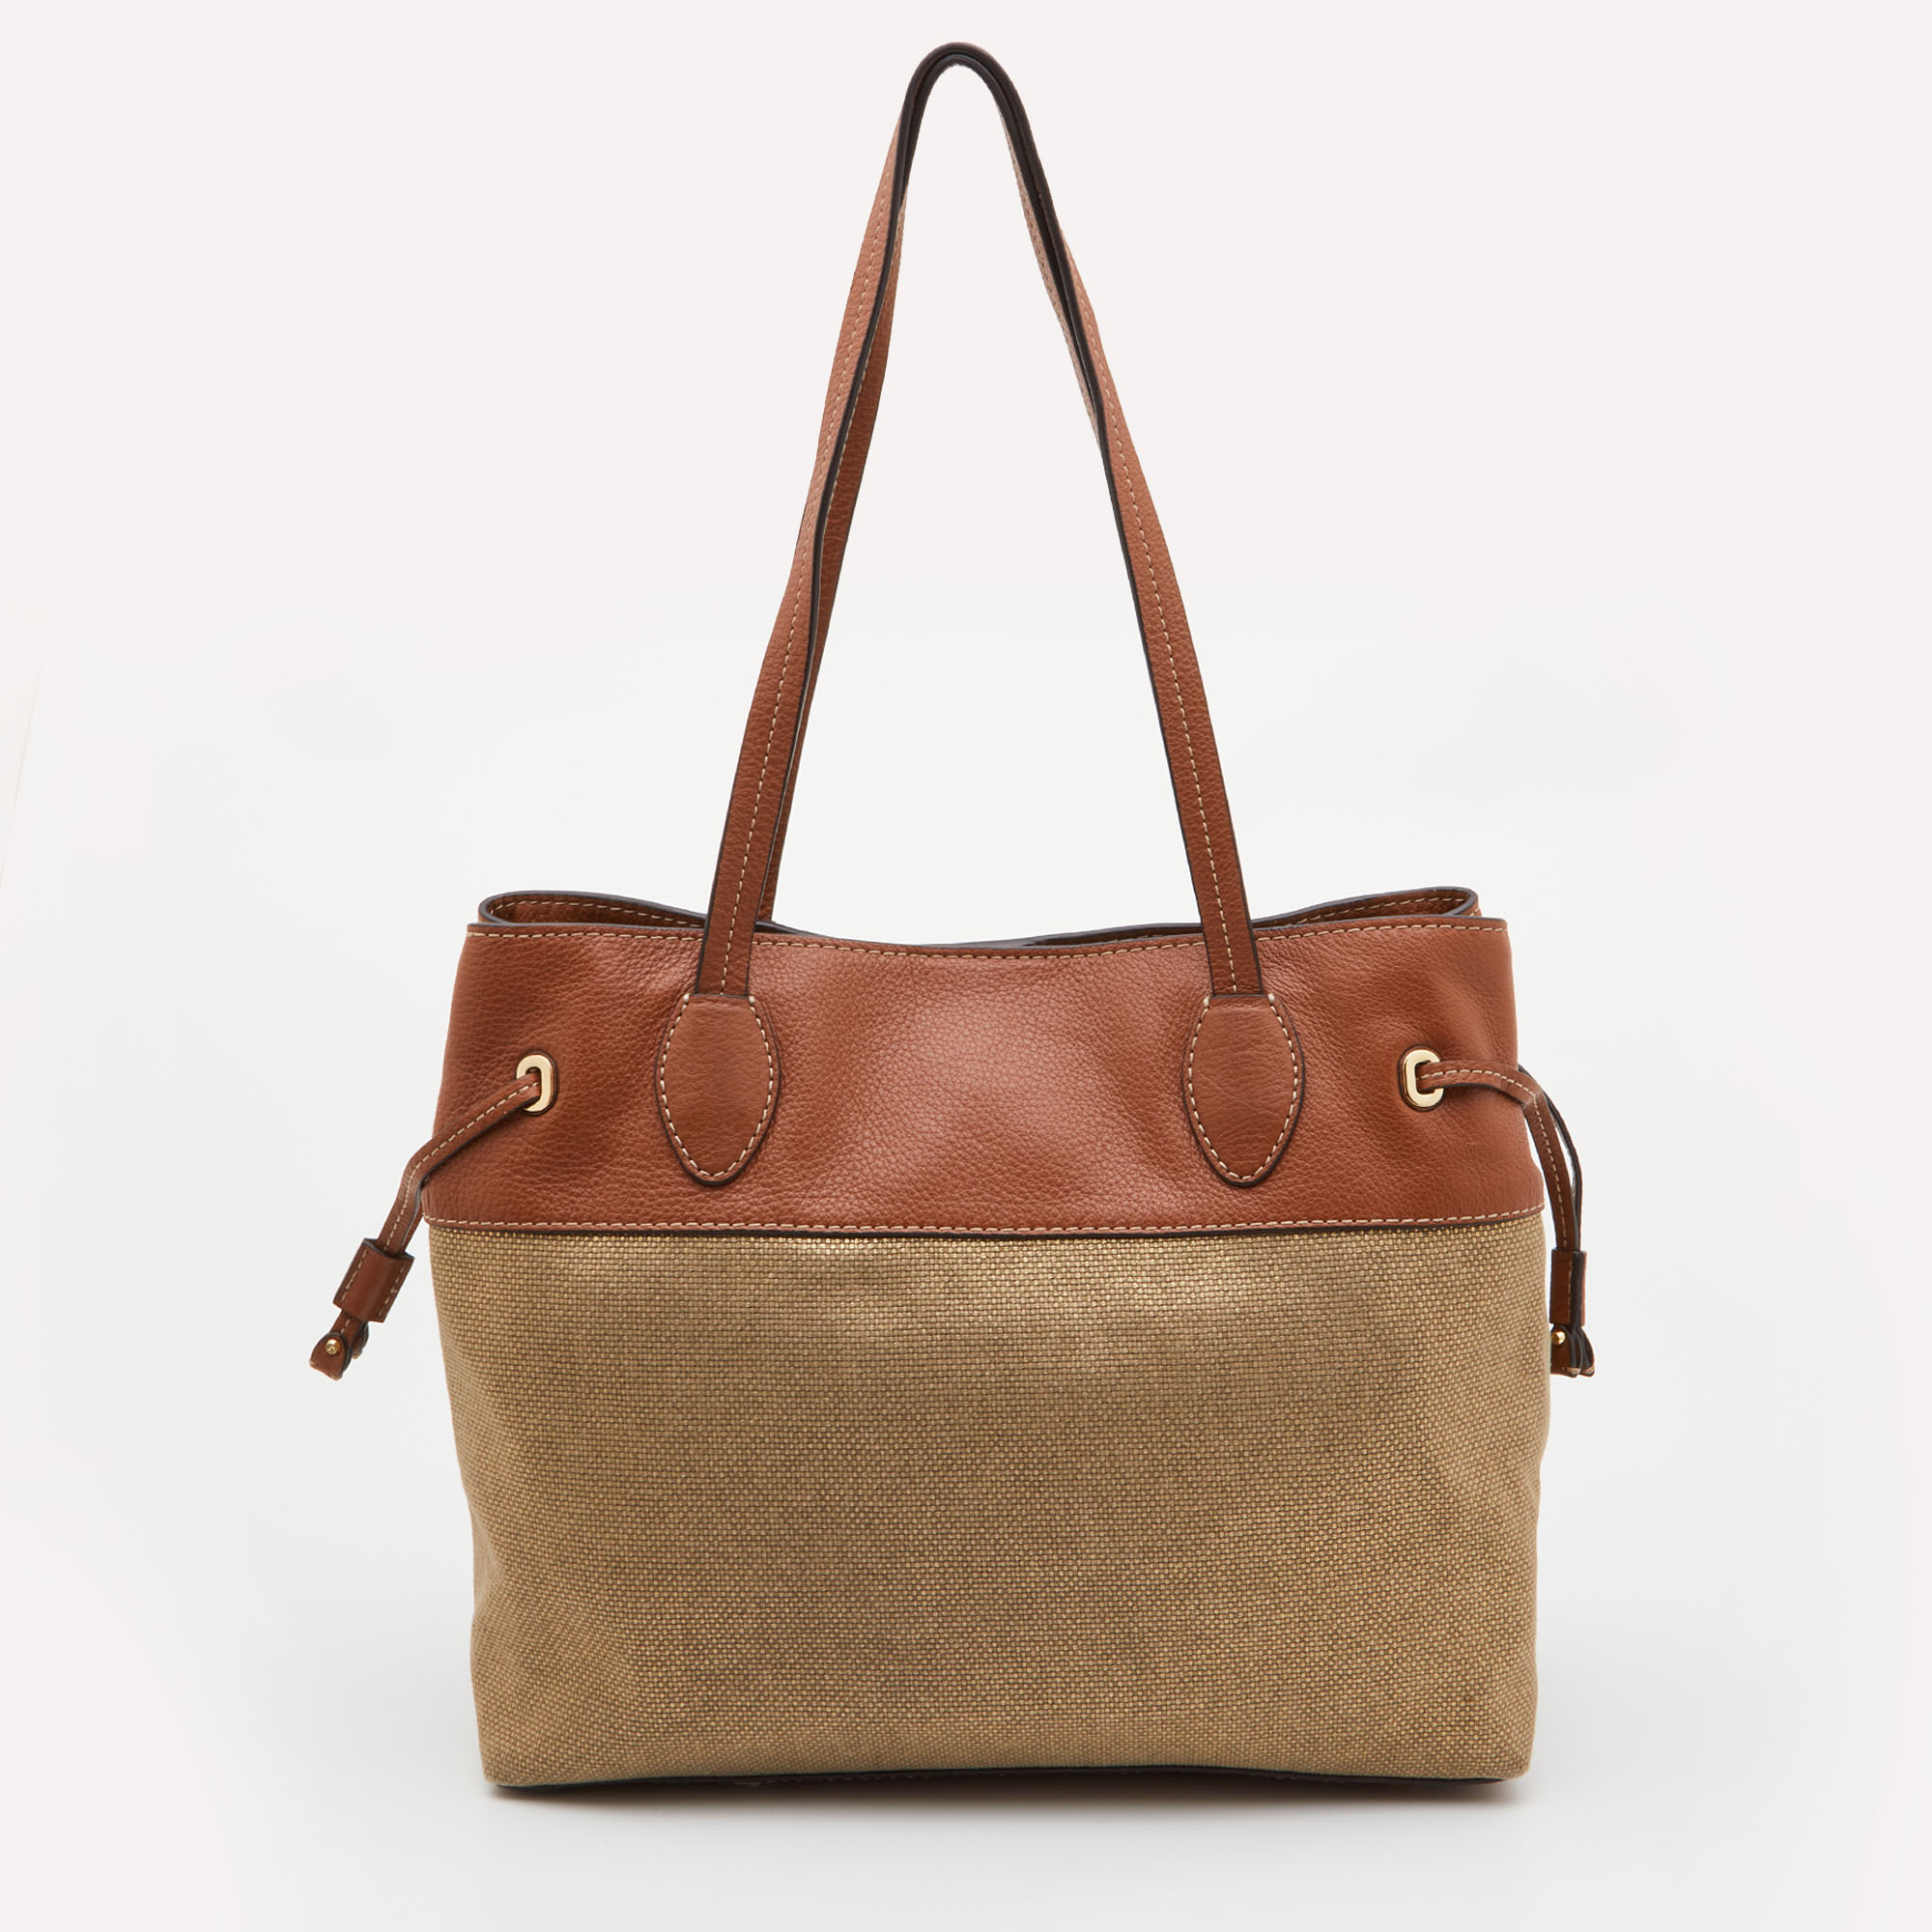 MICHAEL Michael Kors Tan Canvas And Leather Tote